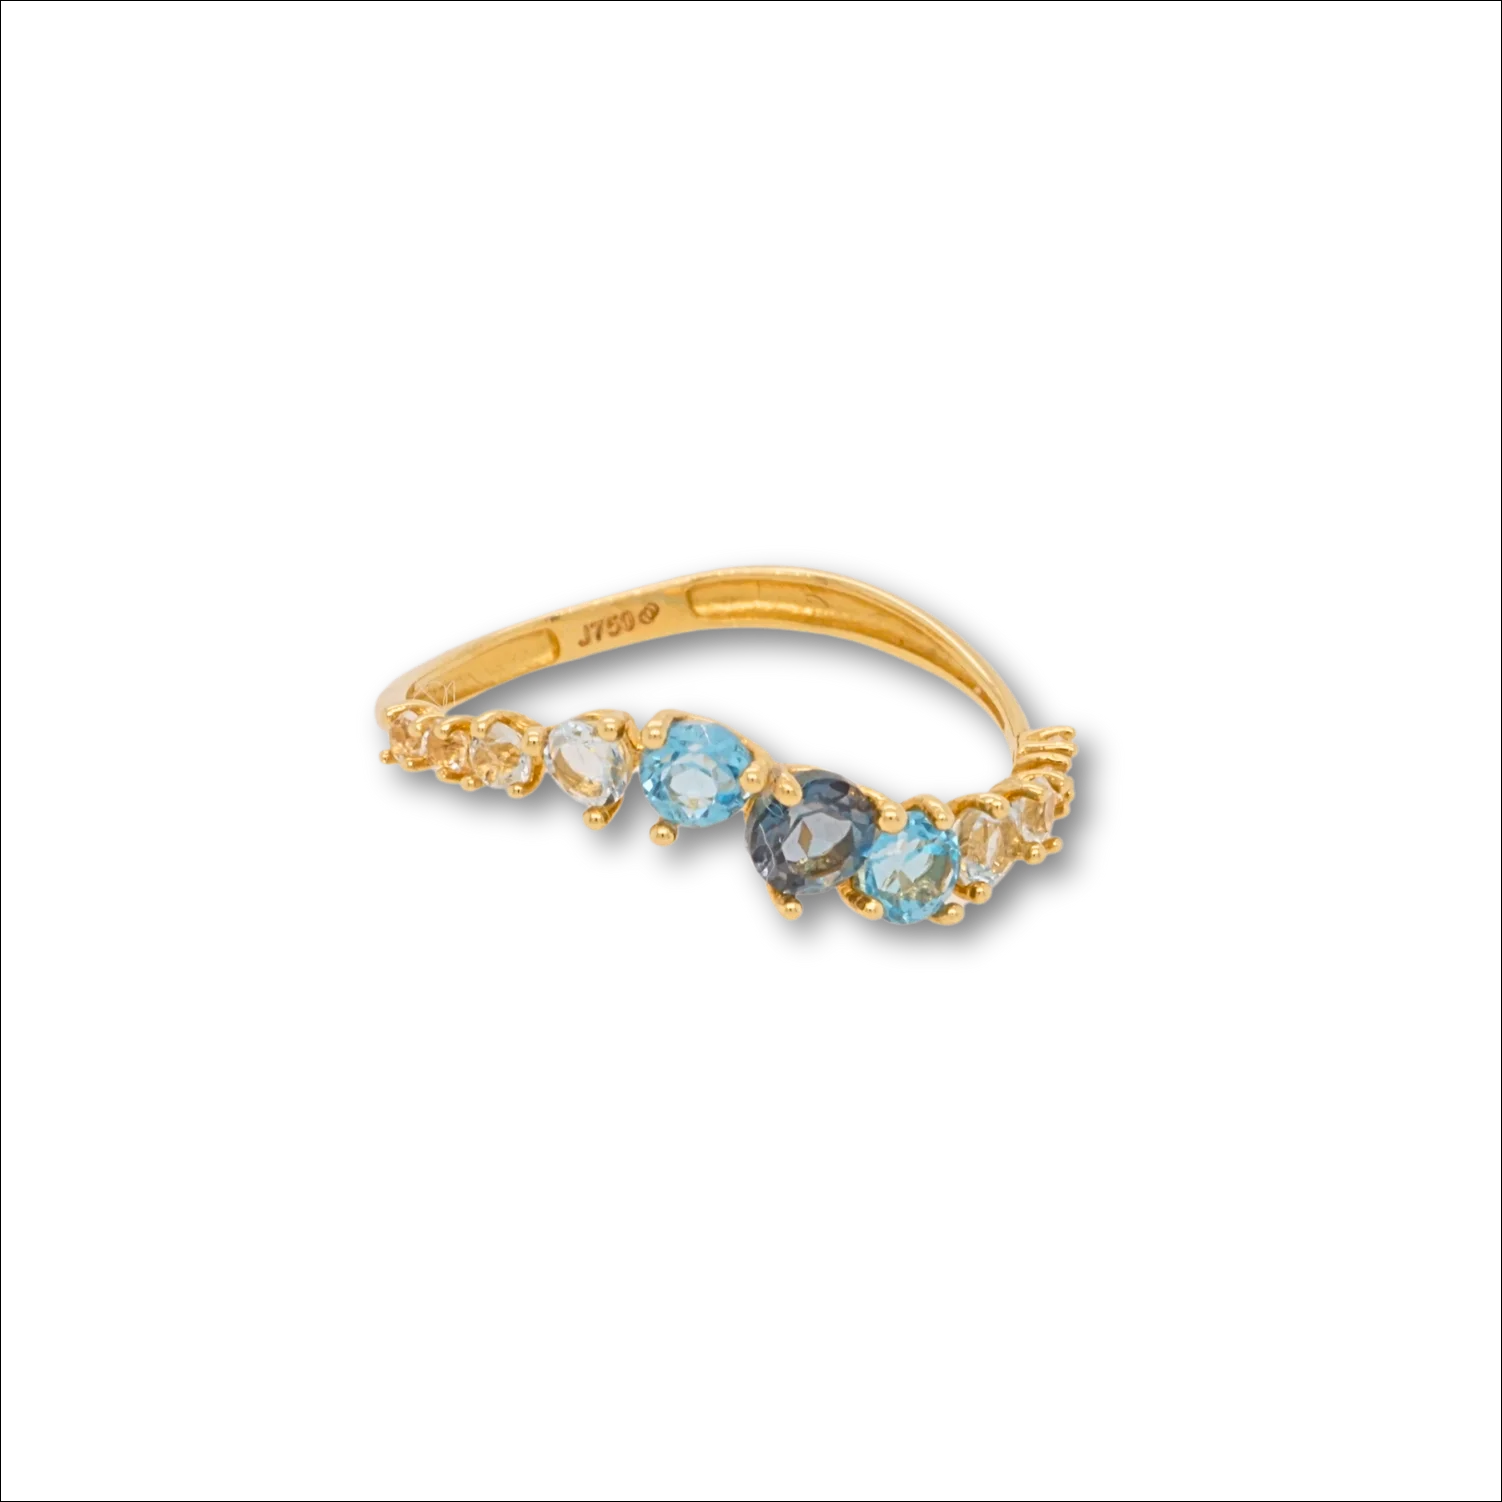 Tranquil gradient cz 18k gold ring | Rings